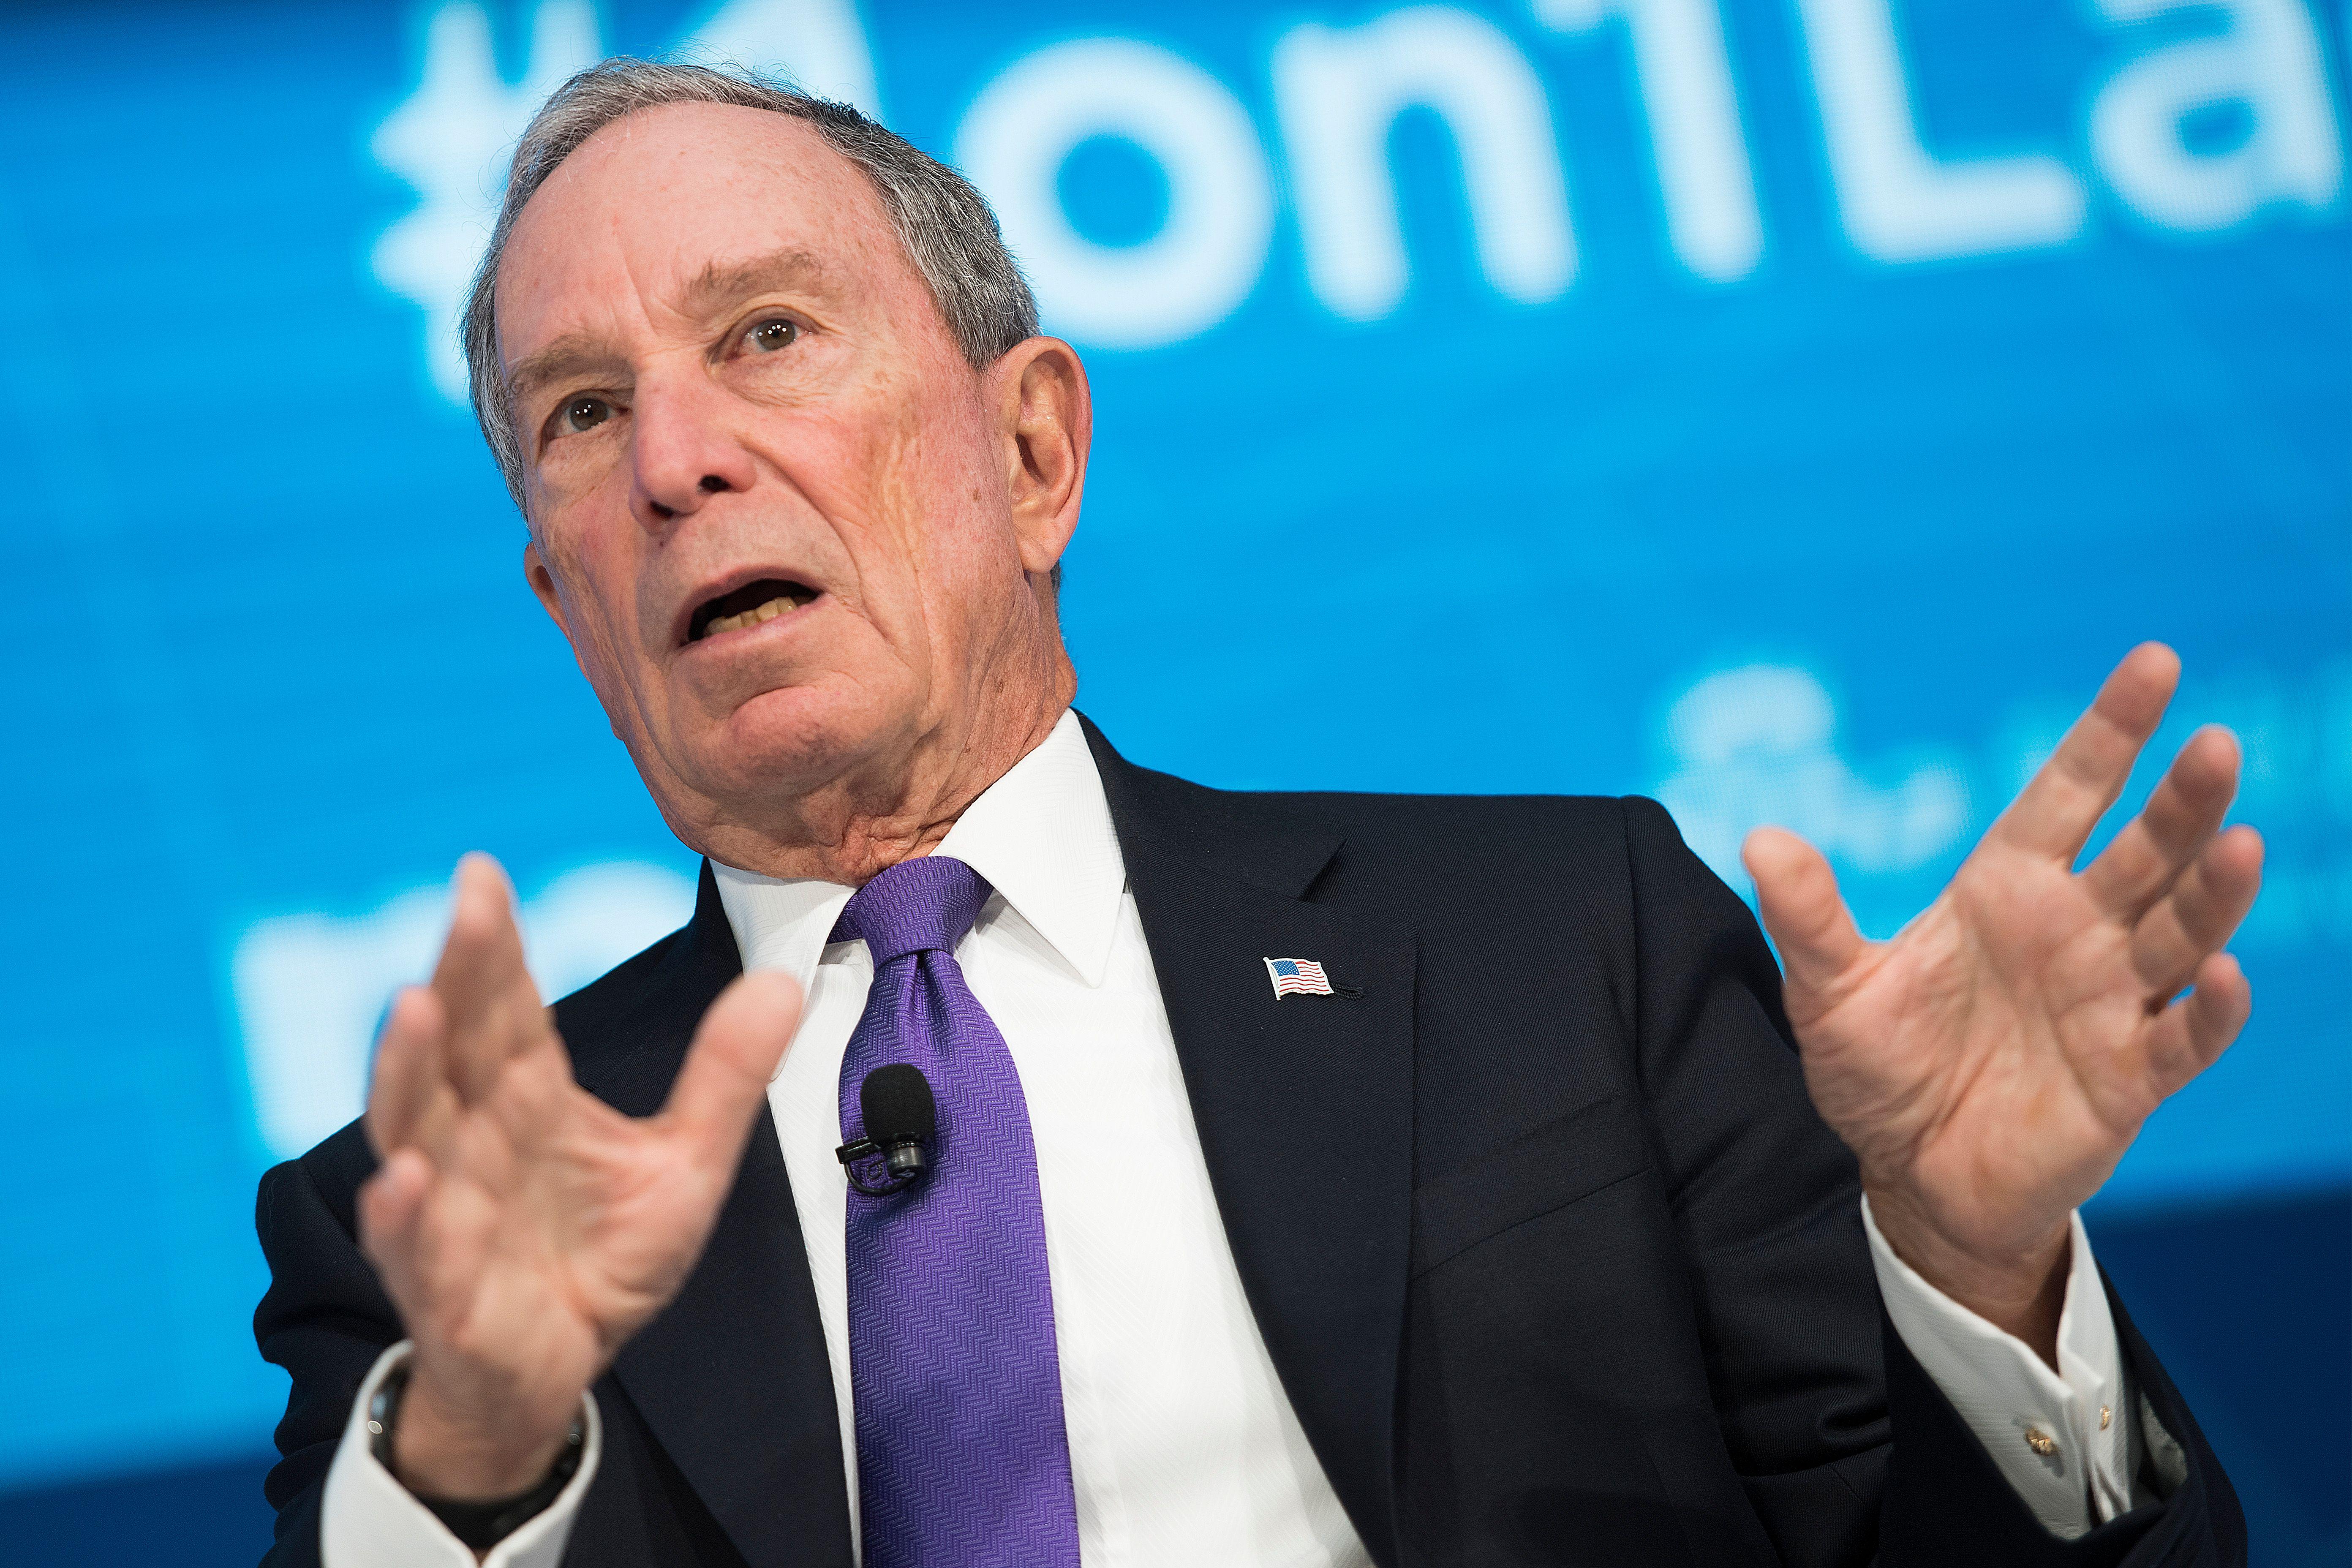 Mike Bloomberg speaks at a World Bank event in Washington, DC.